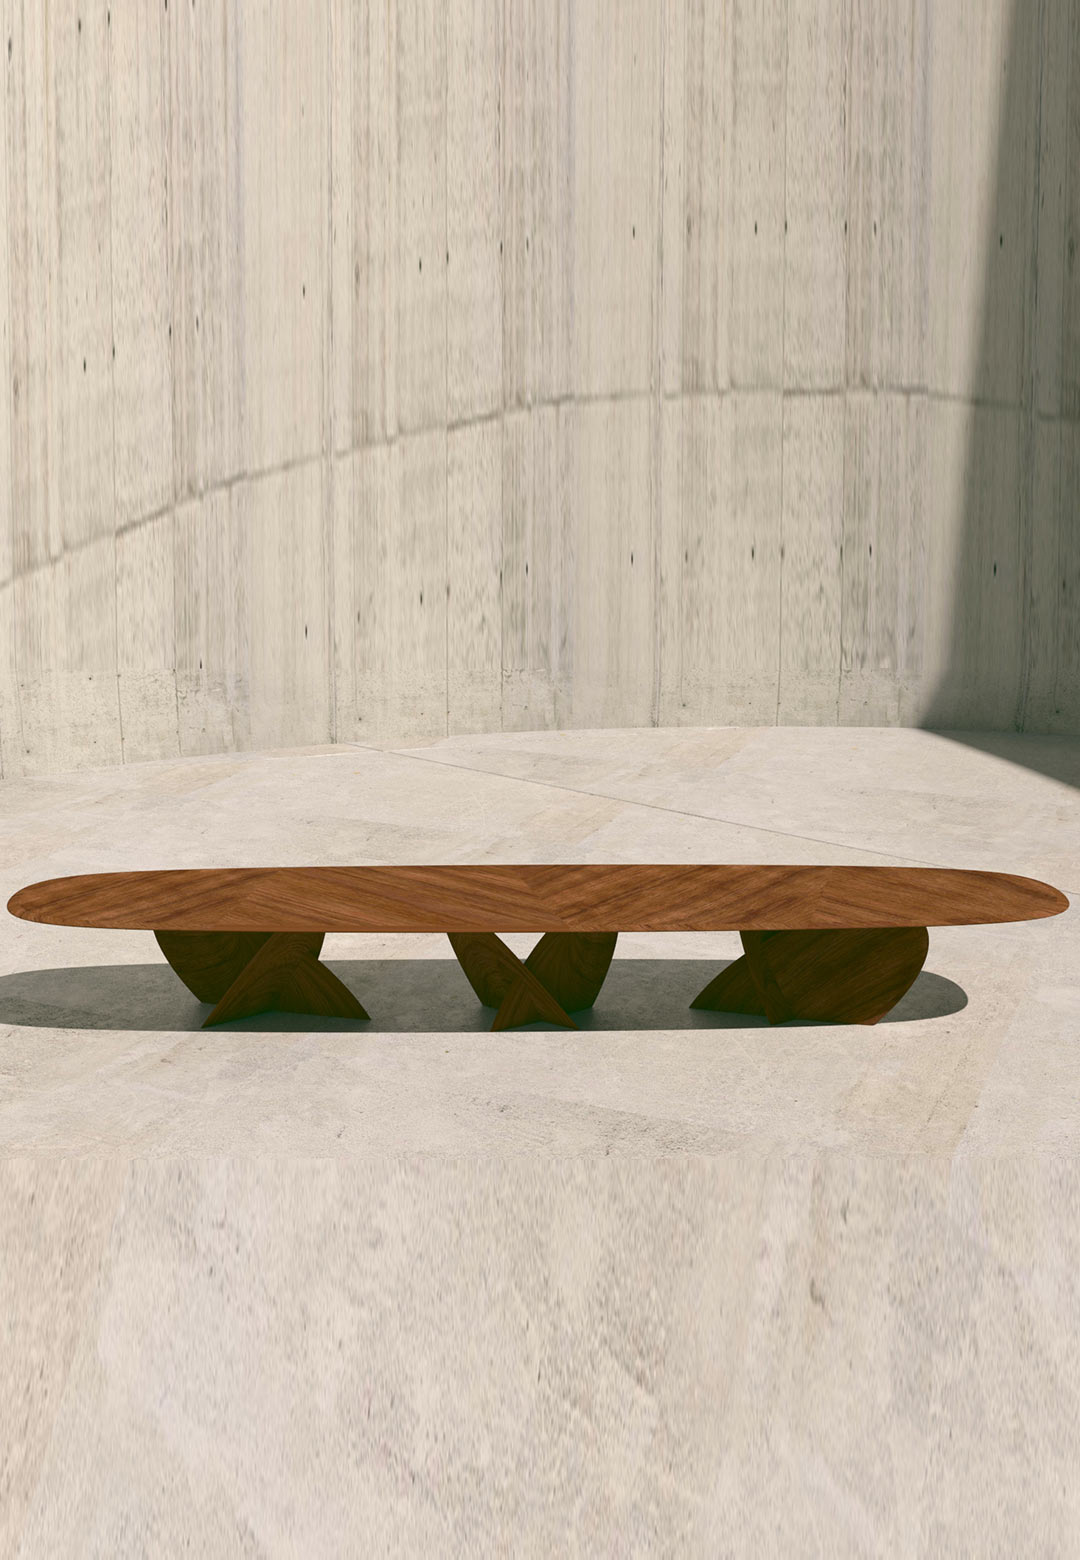 Gal Gaon crafts 'SIX' a series of wooden collide tables